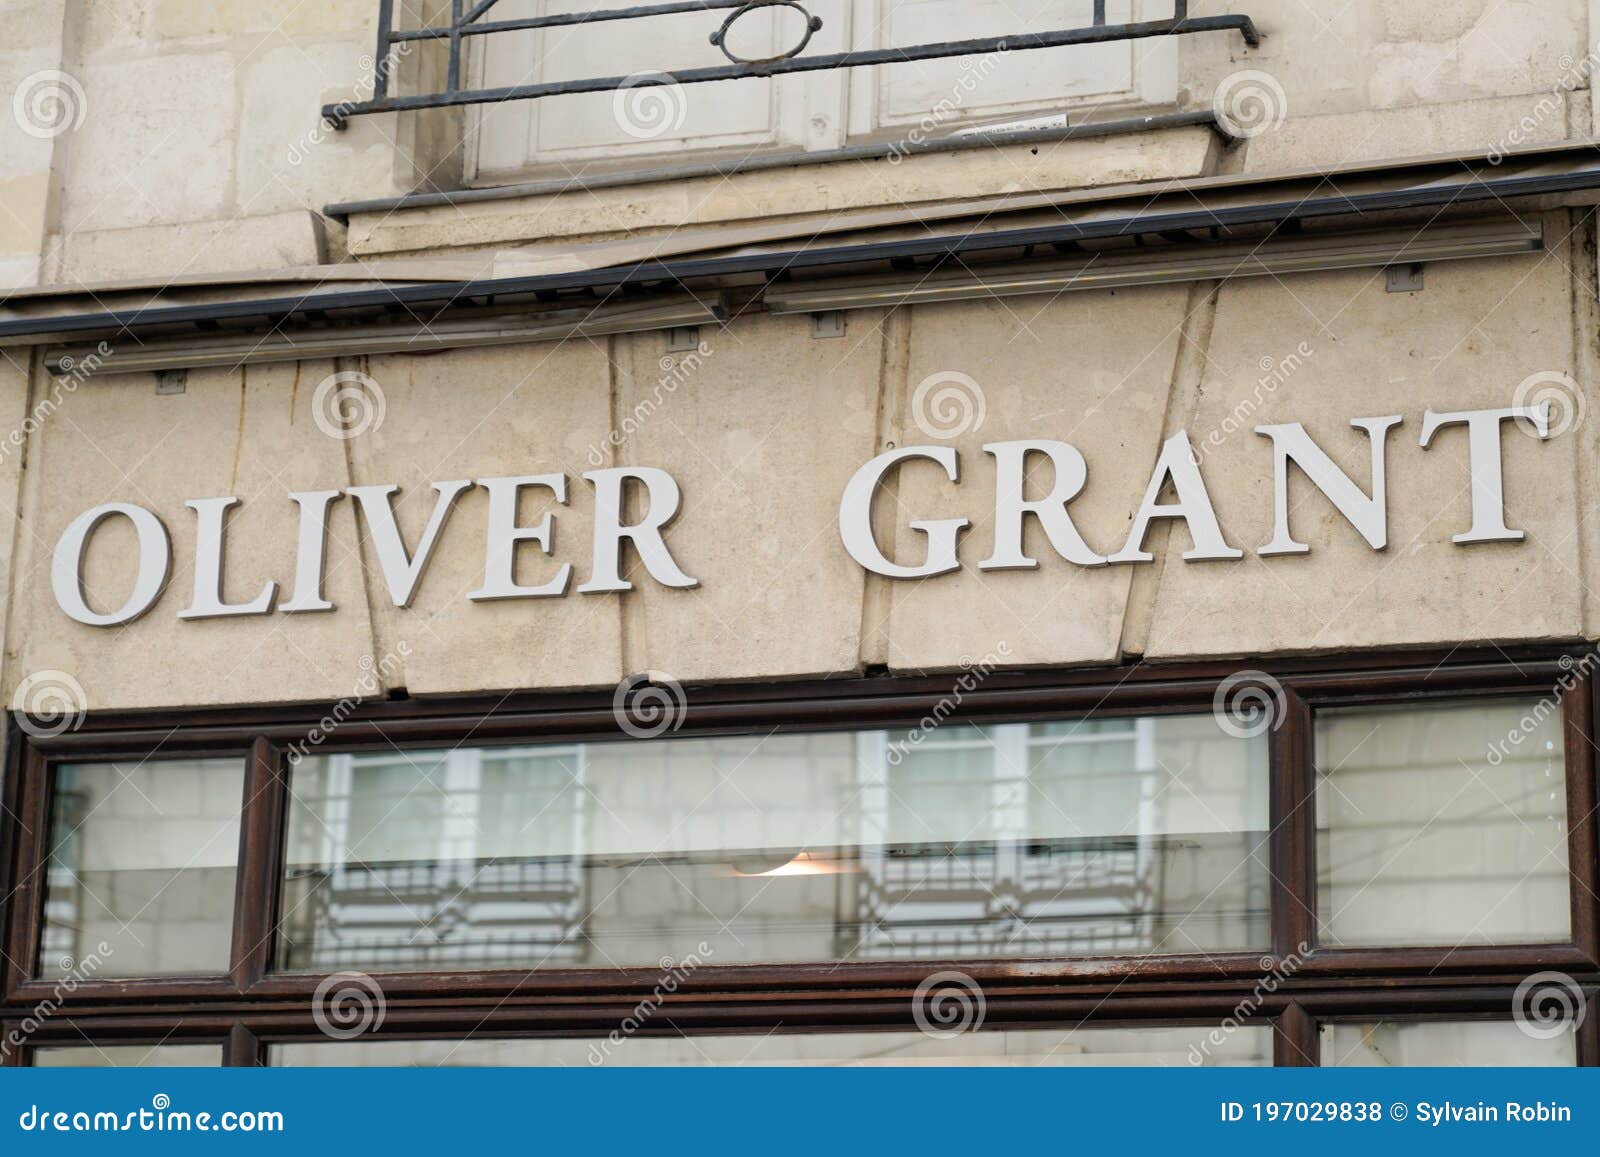 Oliver Grant Logo and Text Sign of Outlet Store Fashion Luxury Editorial Stock Photo - Image of editorial: